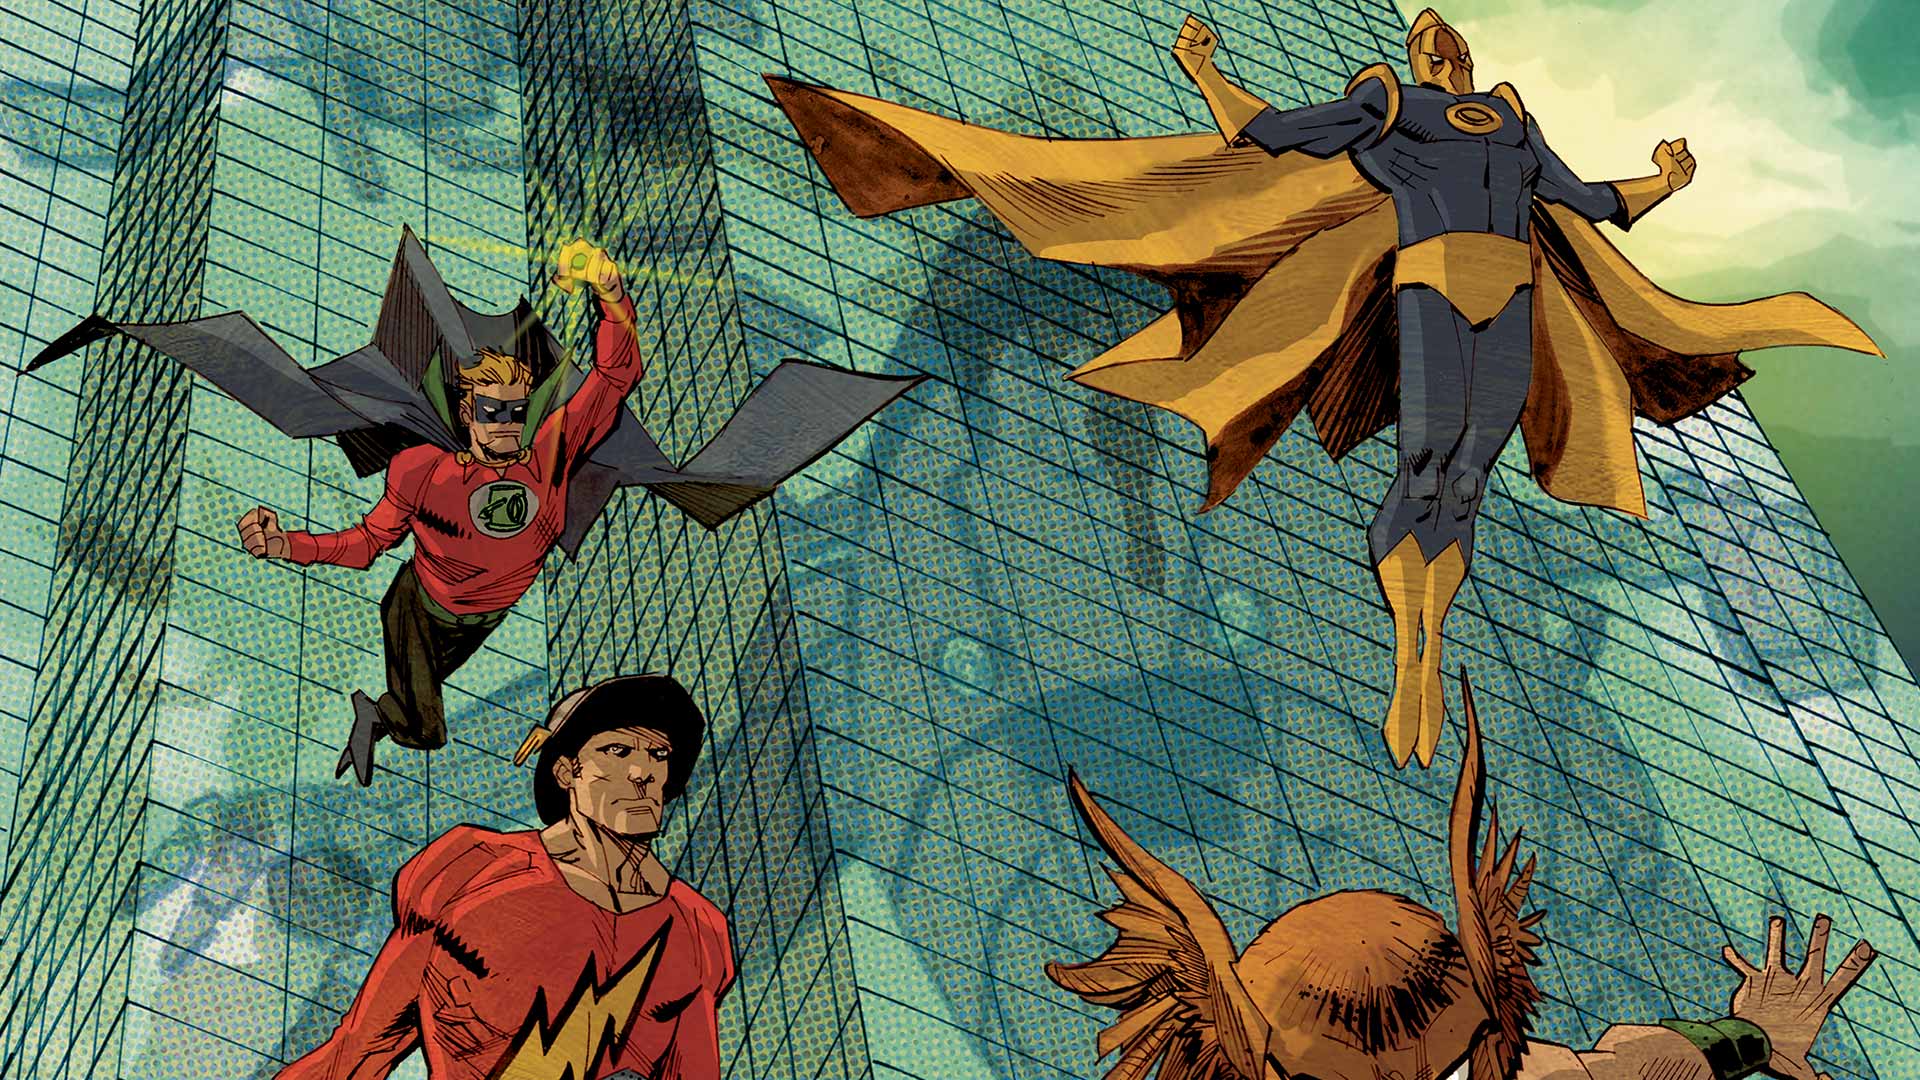 CONVERGENCE: JUSTICE SOCIETY OF AMERICA